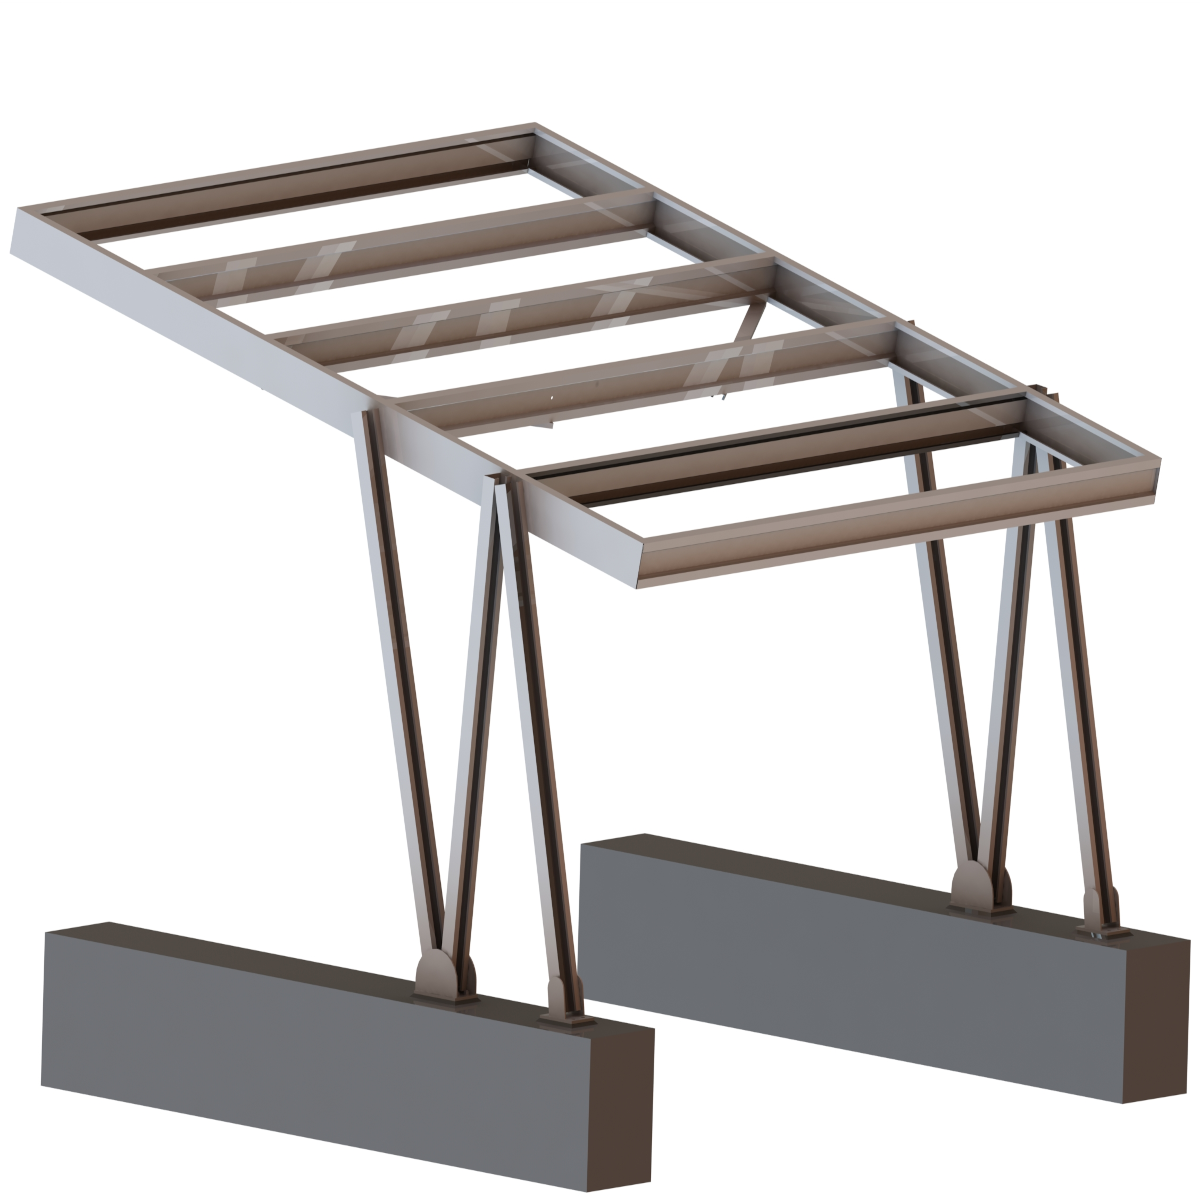 Eleven-module carport mounting system